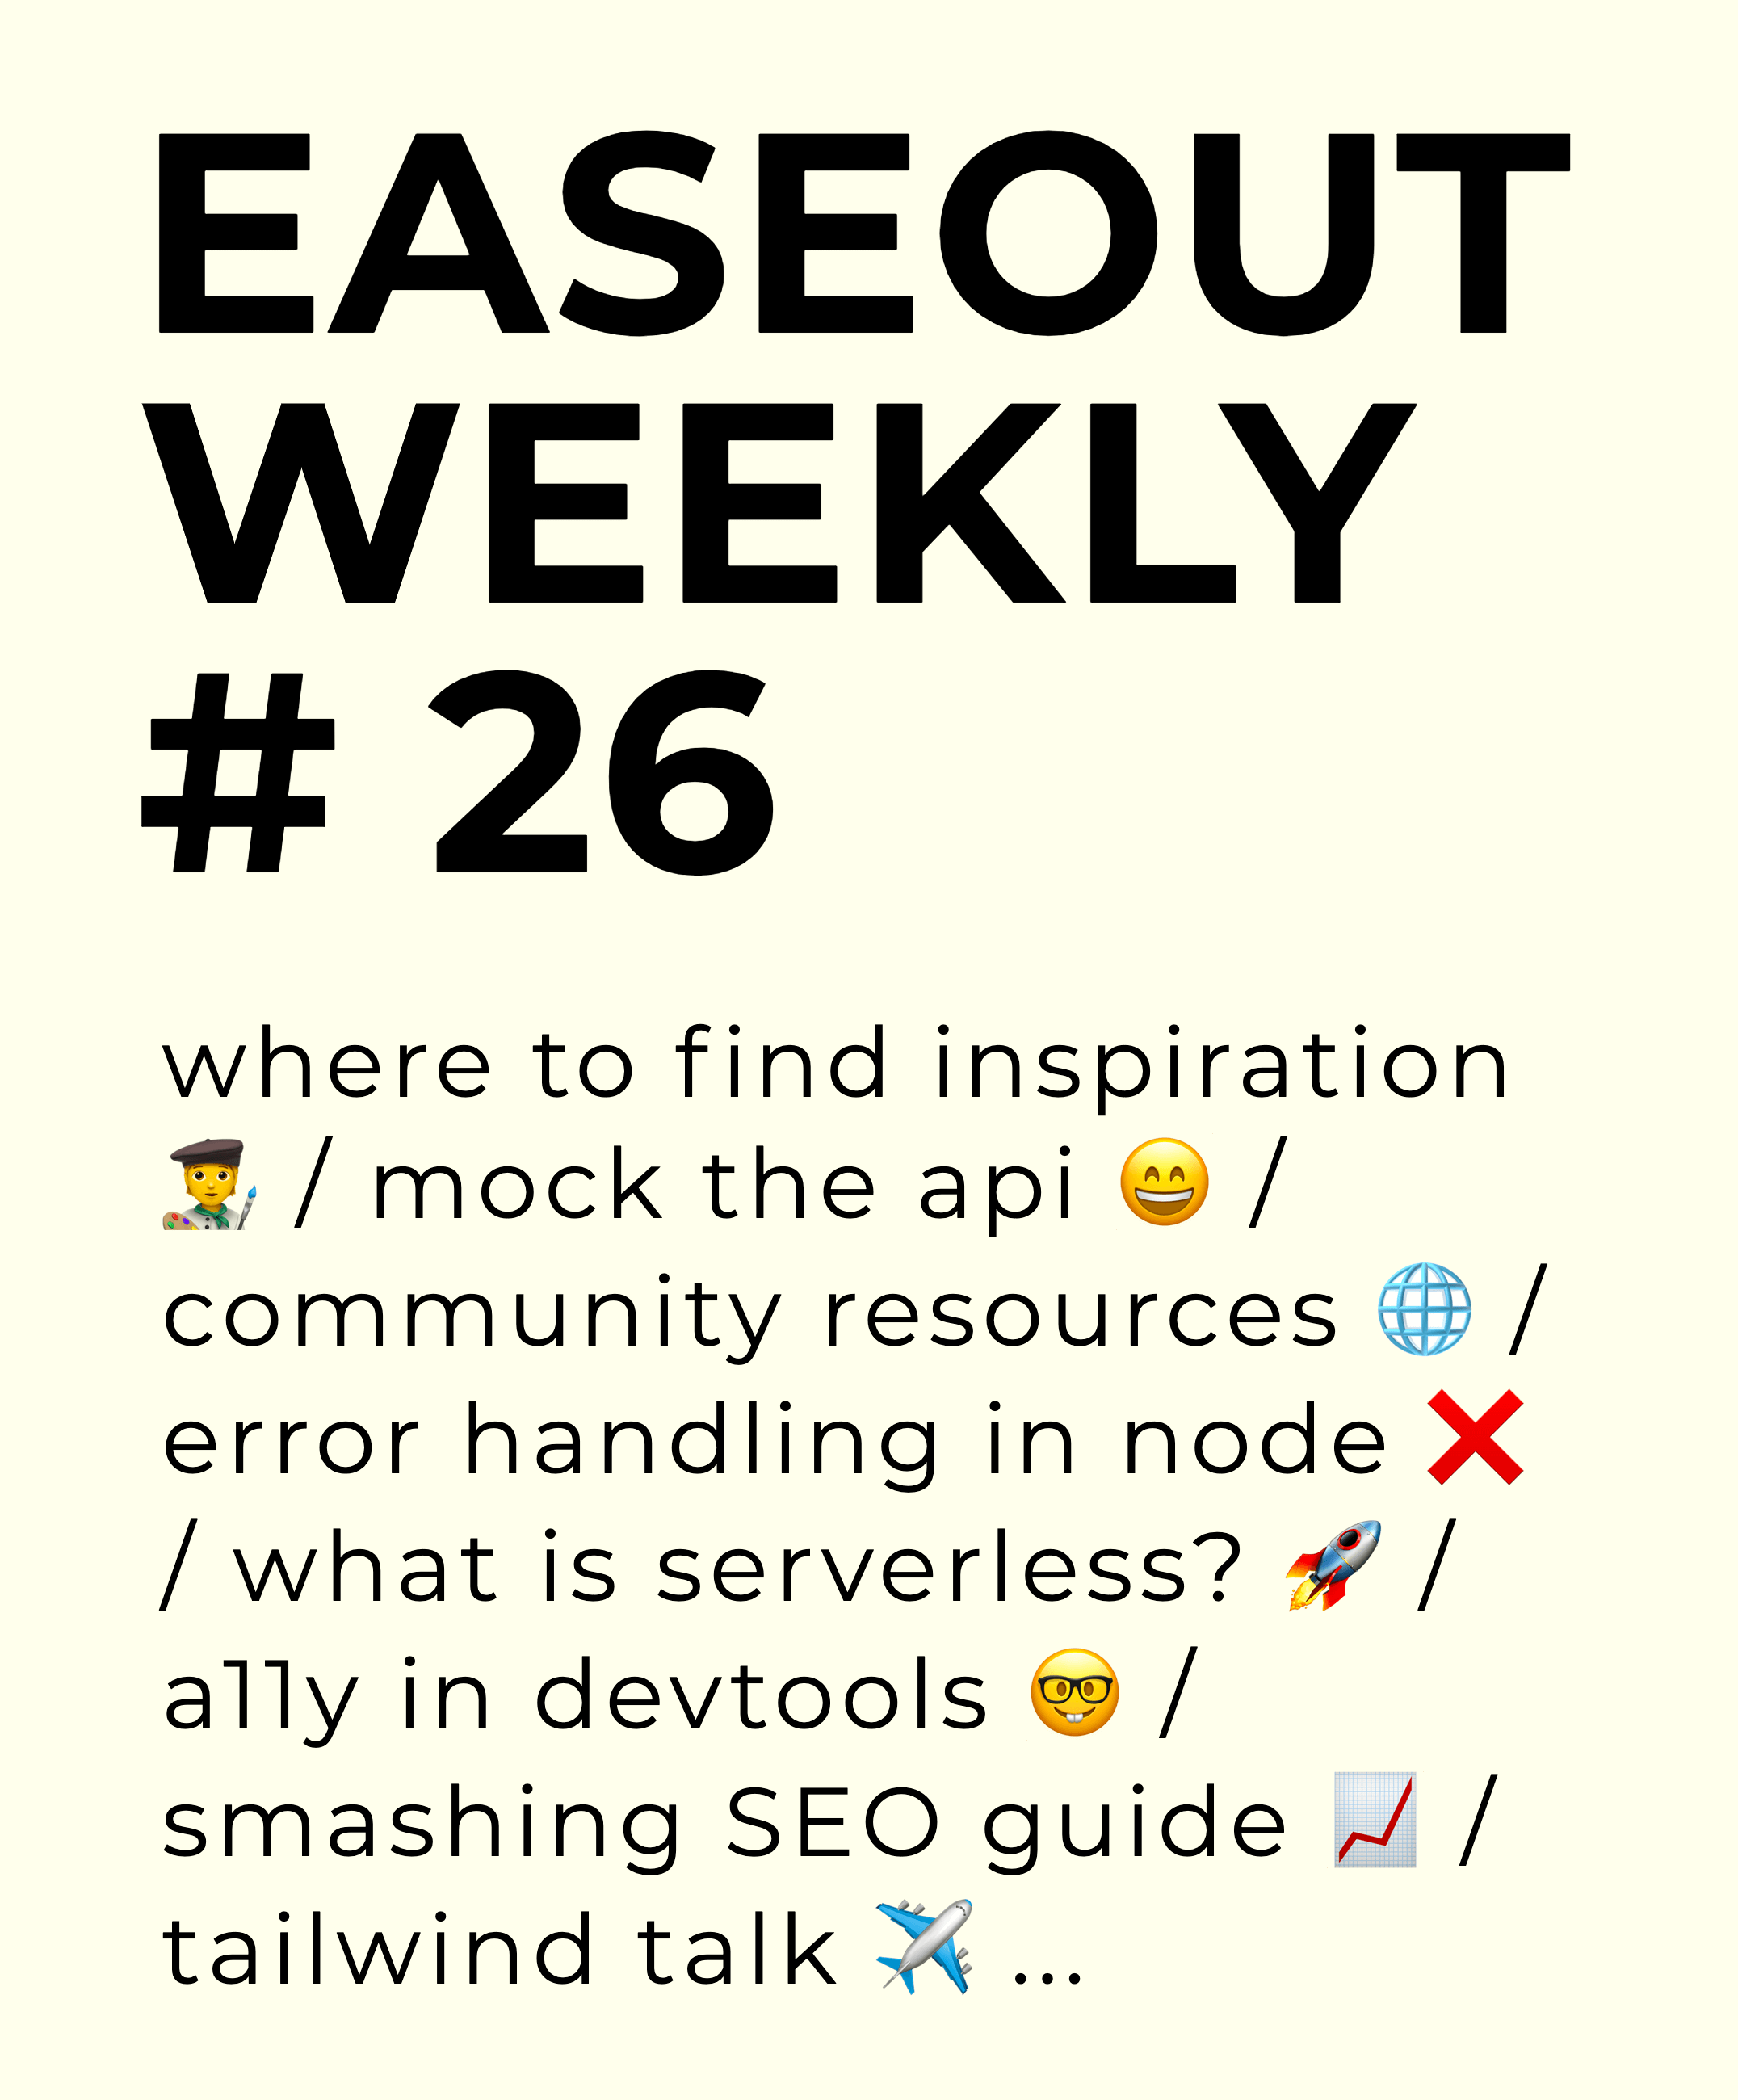 Easeout Weekly #26